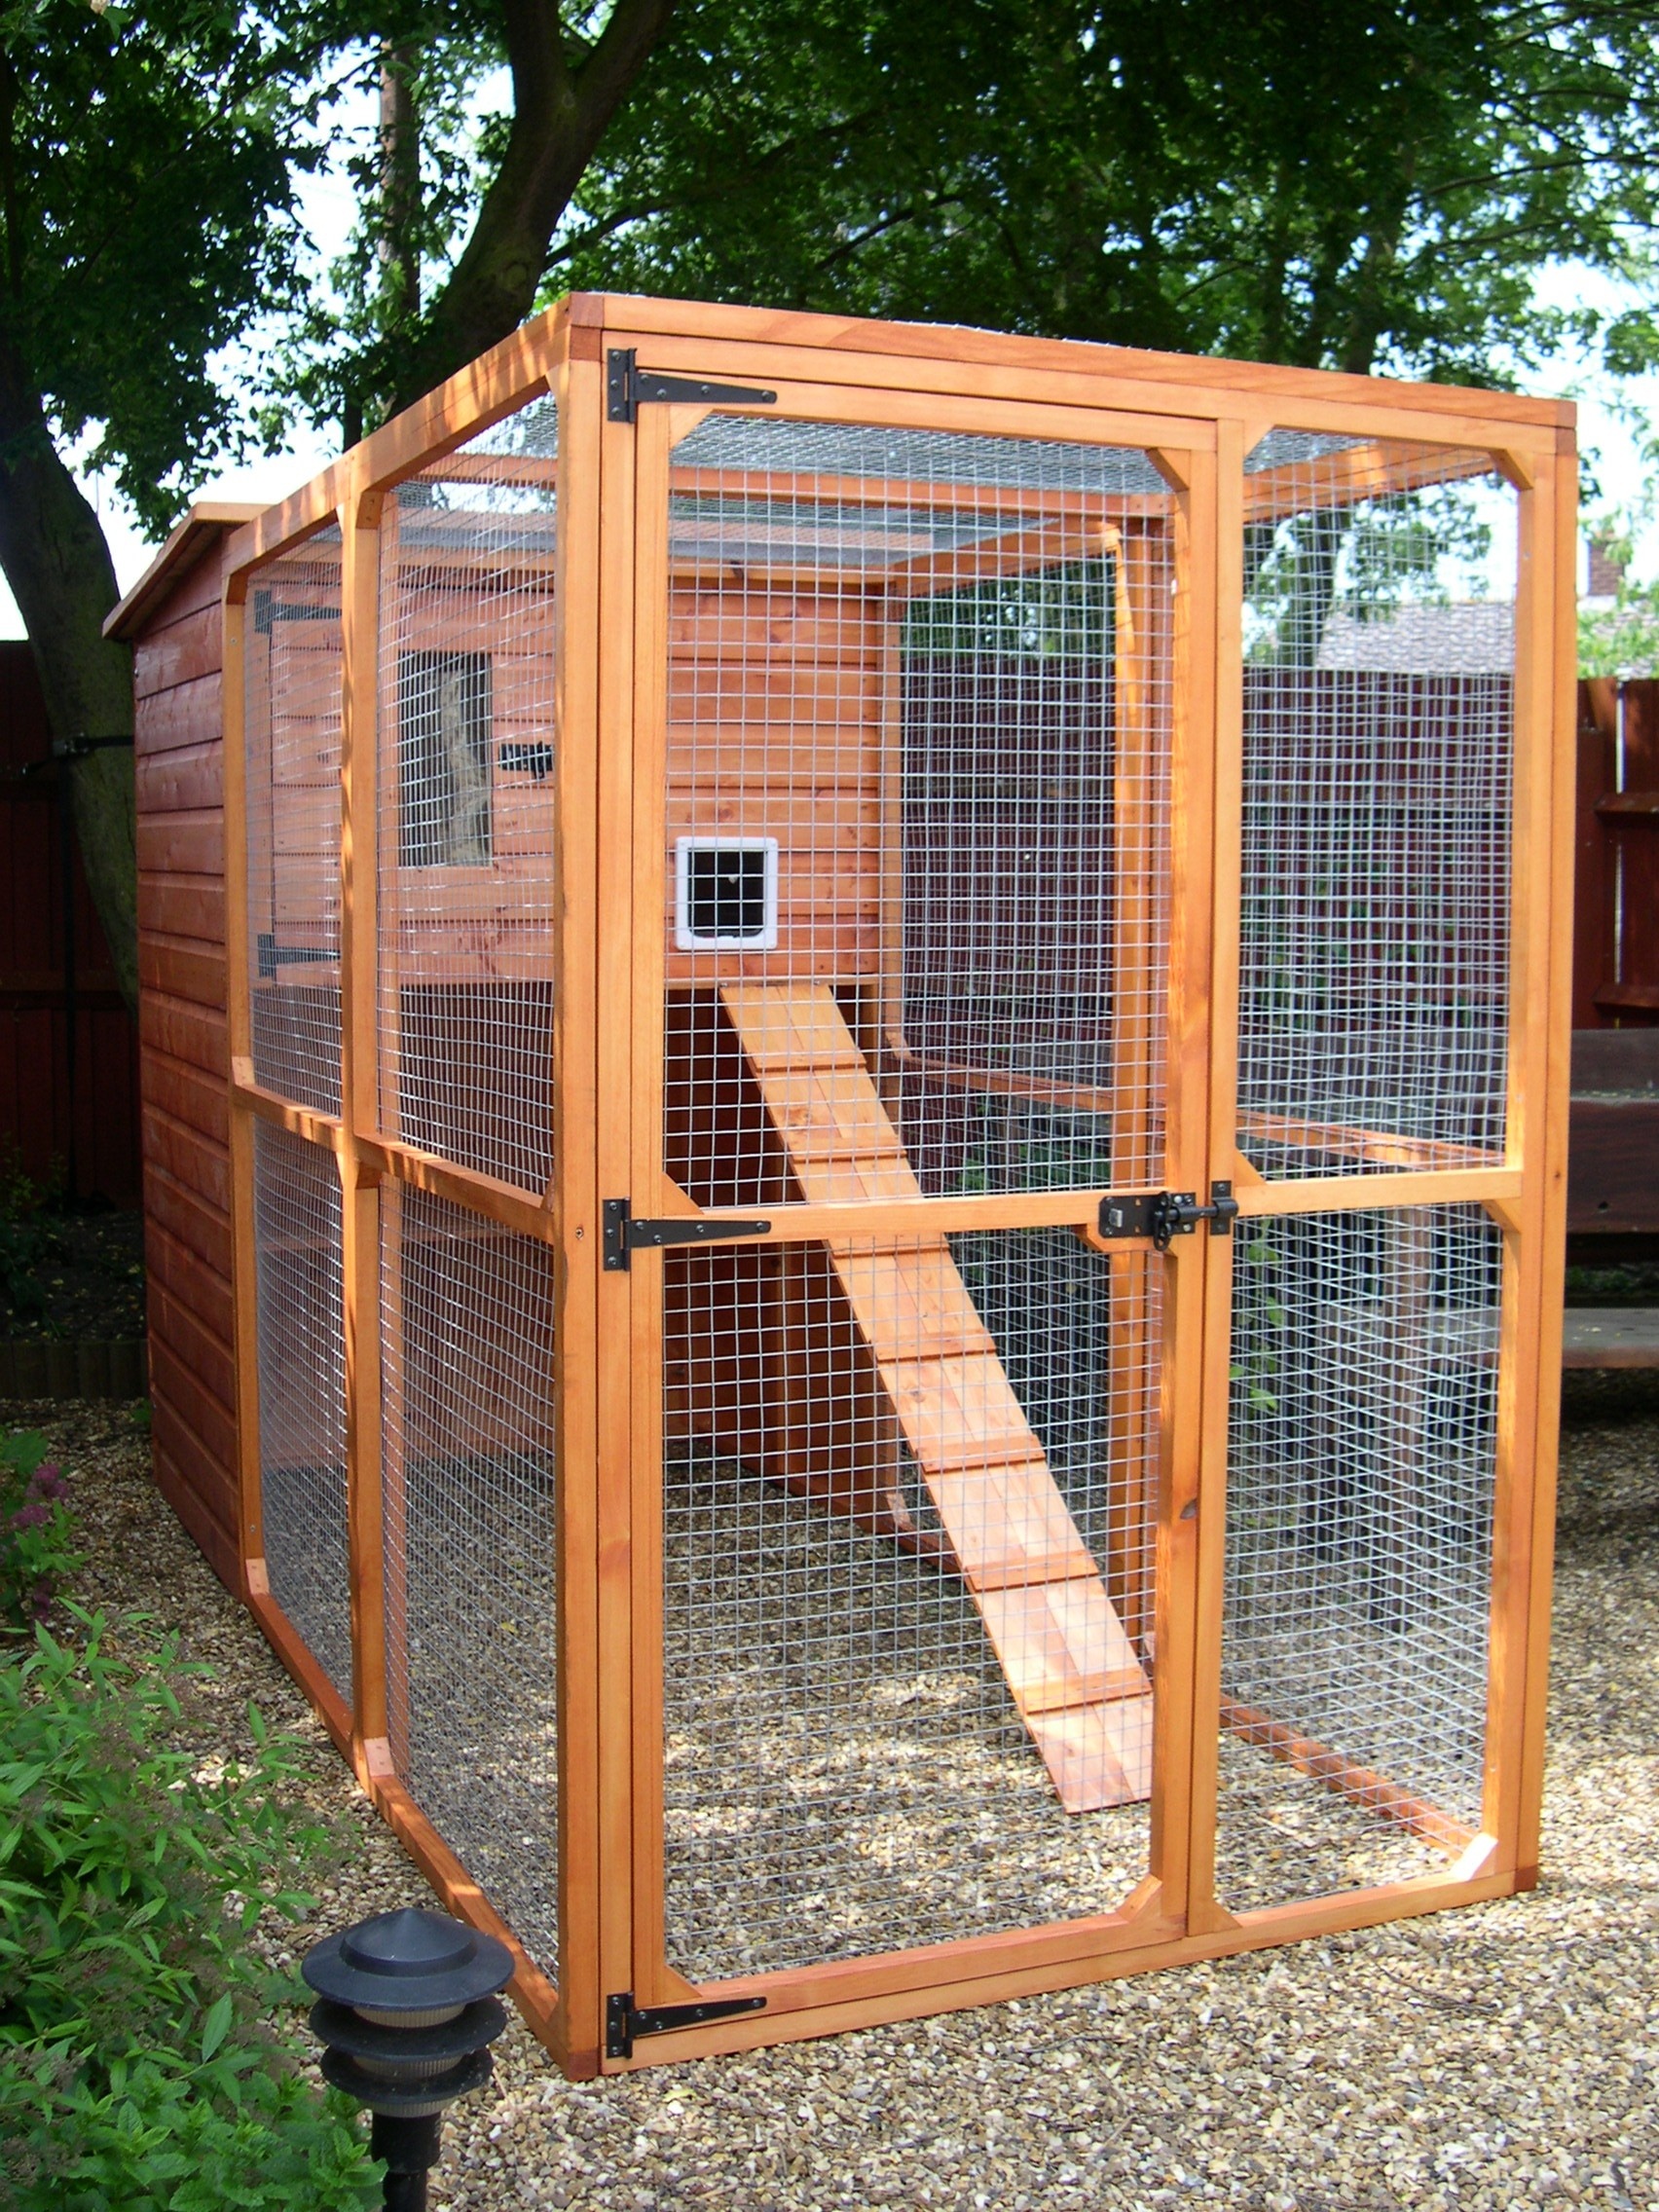 Building a catio – an outside cat enclosure